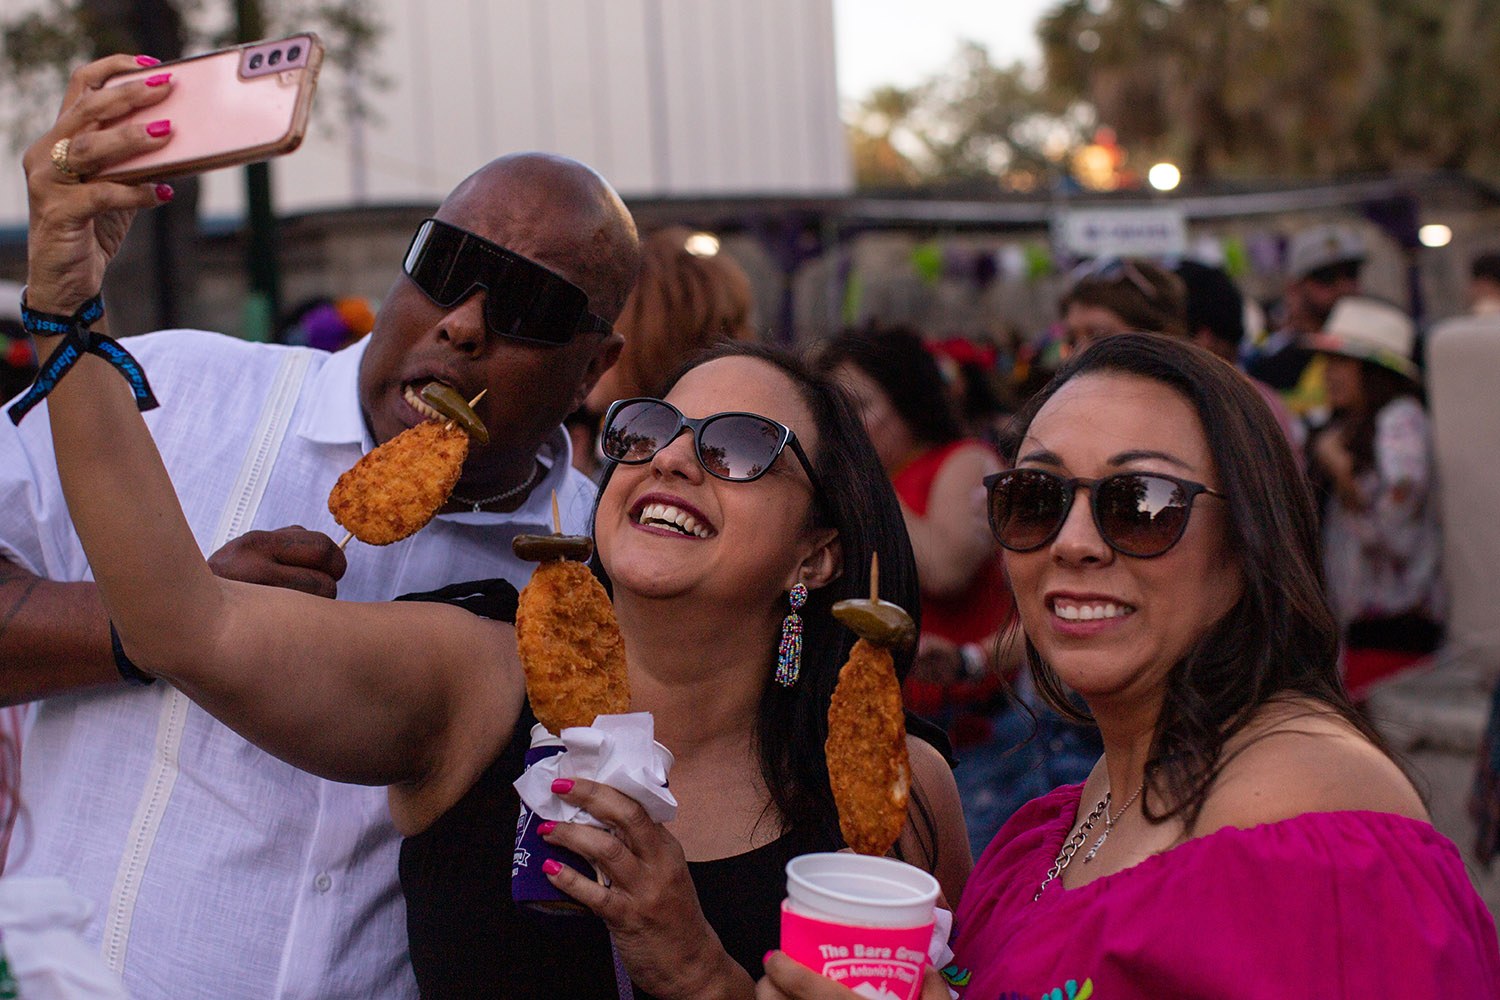 Chickens-on-a-stick are sold by the thousands at the Mr. Chicken booth on the second night of A Night in Old San Antonio, or NIOSA, during Fiesta on Wednesday, April 6, 2022, at La Villita in downtown San Antonio, Texas. Photo by Kaylee Greenlee Beal | Heron contributor